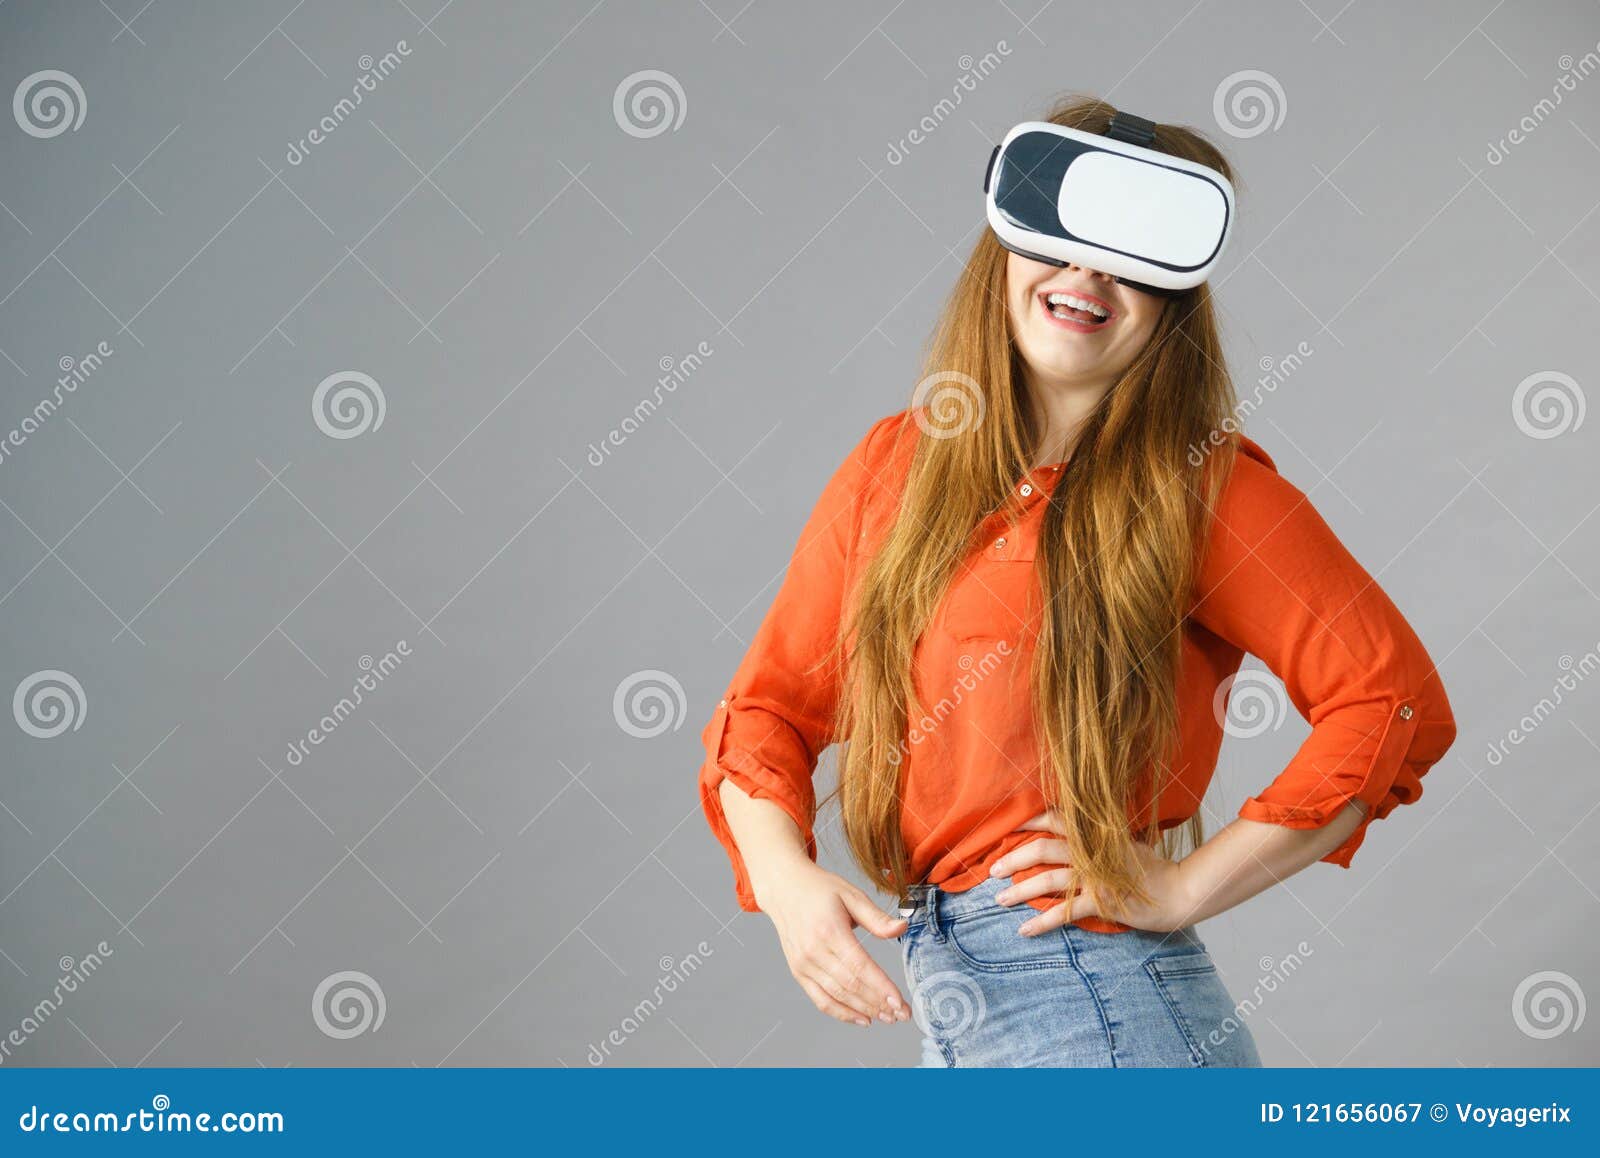 Close-Up Photo of a Woman Wearing Vr Goggles · Free Stock 